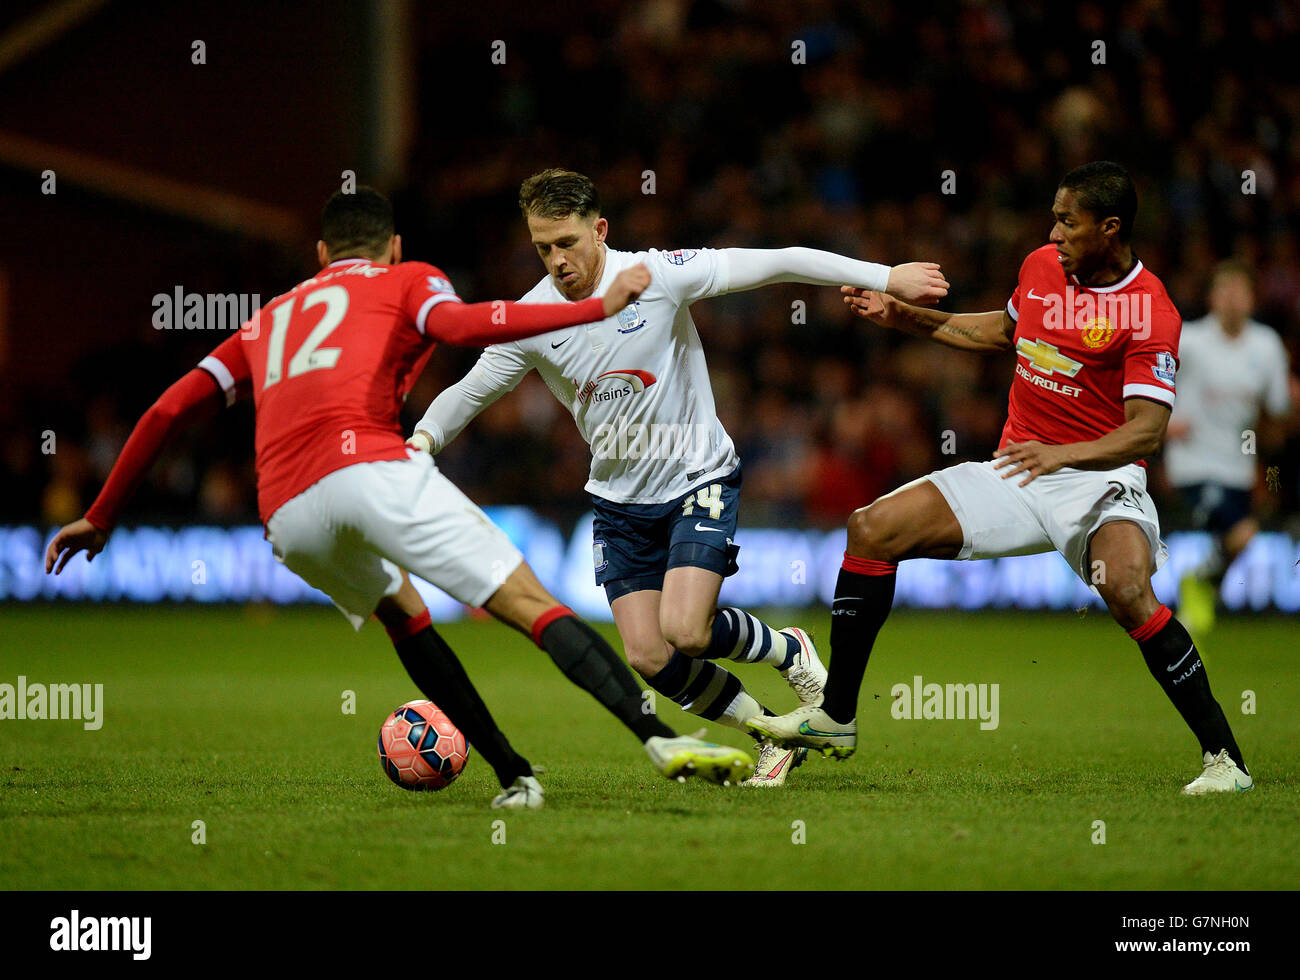 Preston North End's Joe Garner (centre) in action with Manchester United's Luis Antonio Valencia (right) and Chris Smalling during the FA Cup Fifth Round match at Deepdale Stadium, Preston. PRESS ASSOCIATION Photo. Picture date: Monday February 16, 2015. See PA story SOCCER Preston. Photo credit should read: Martin Rickett/PA Wire. Stock Photo